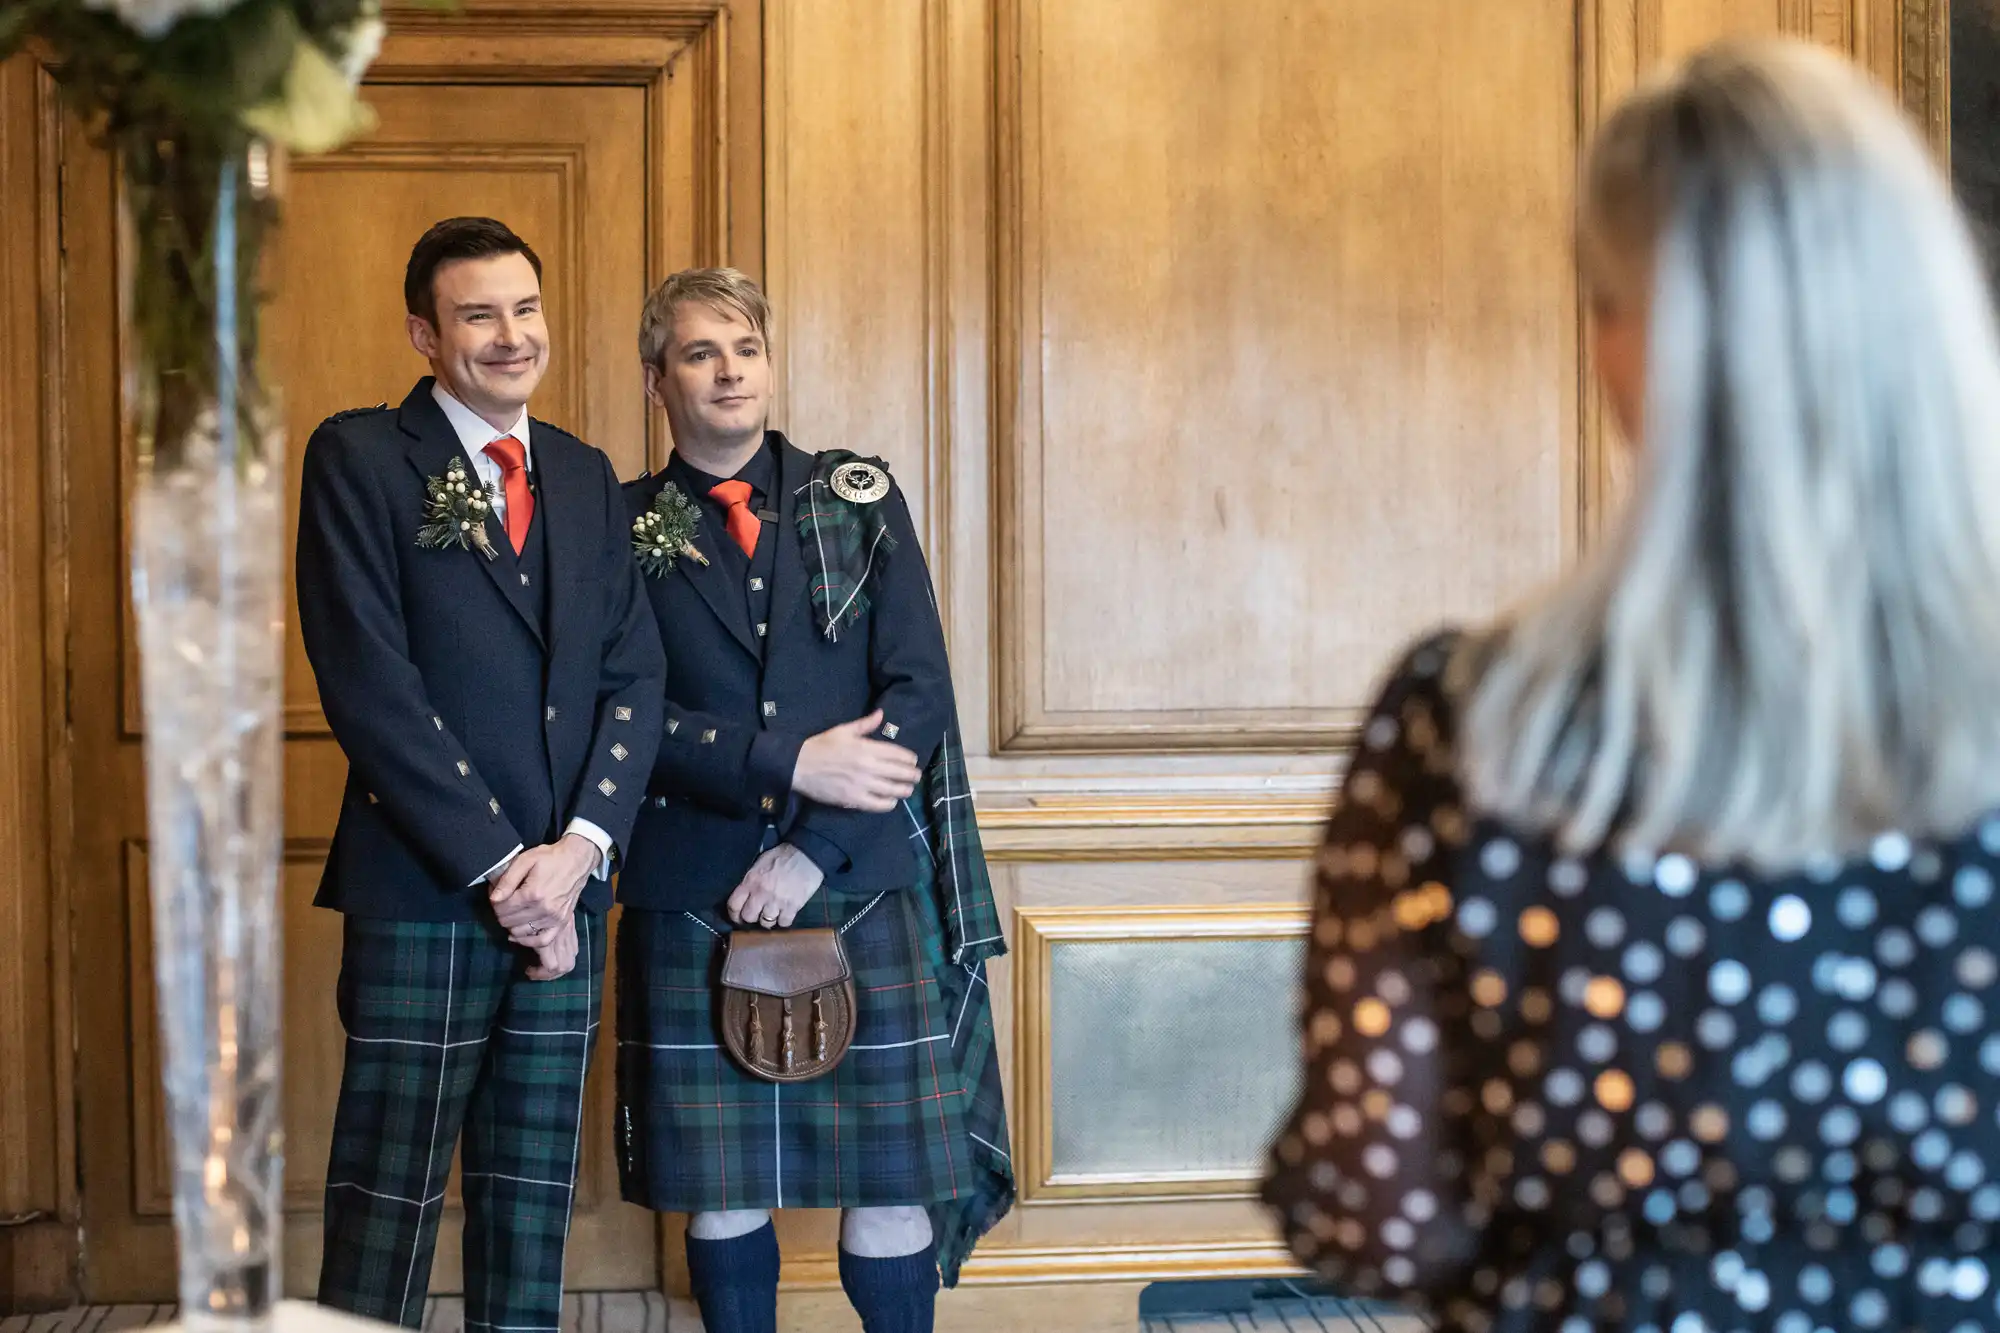 Two men dressed in traditional Scottish kilts and jackets stand together, smiling and holding hands, as they face a woman taking their photo.